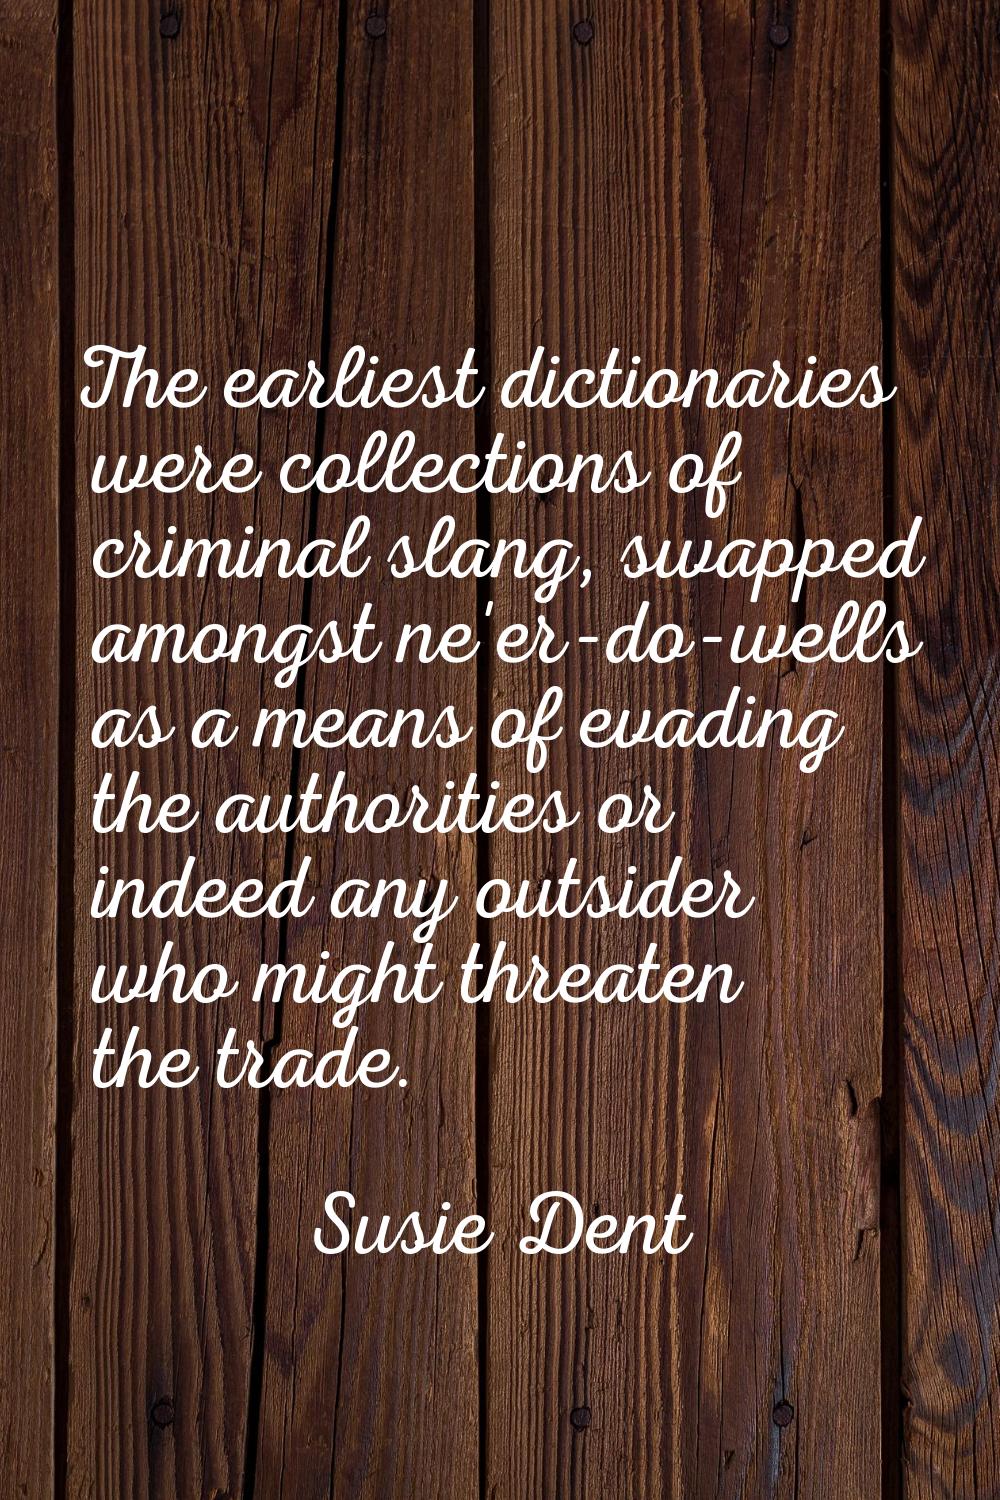 The earliest dictionaries were collections of criminal slang, swapped amongst ne'er-do-wells as a m